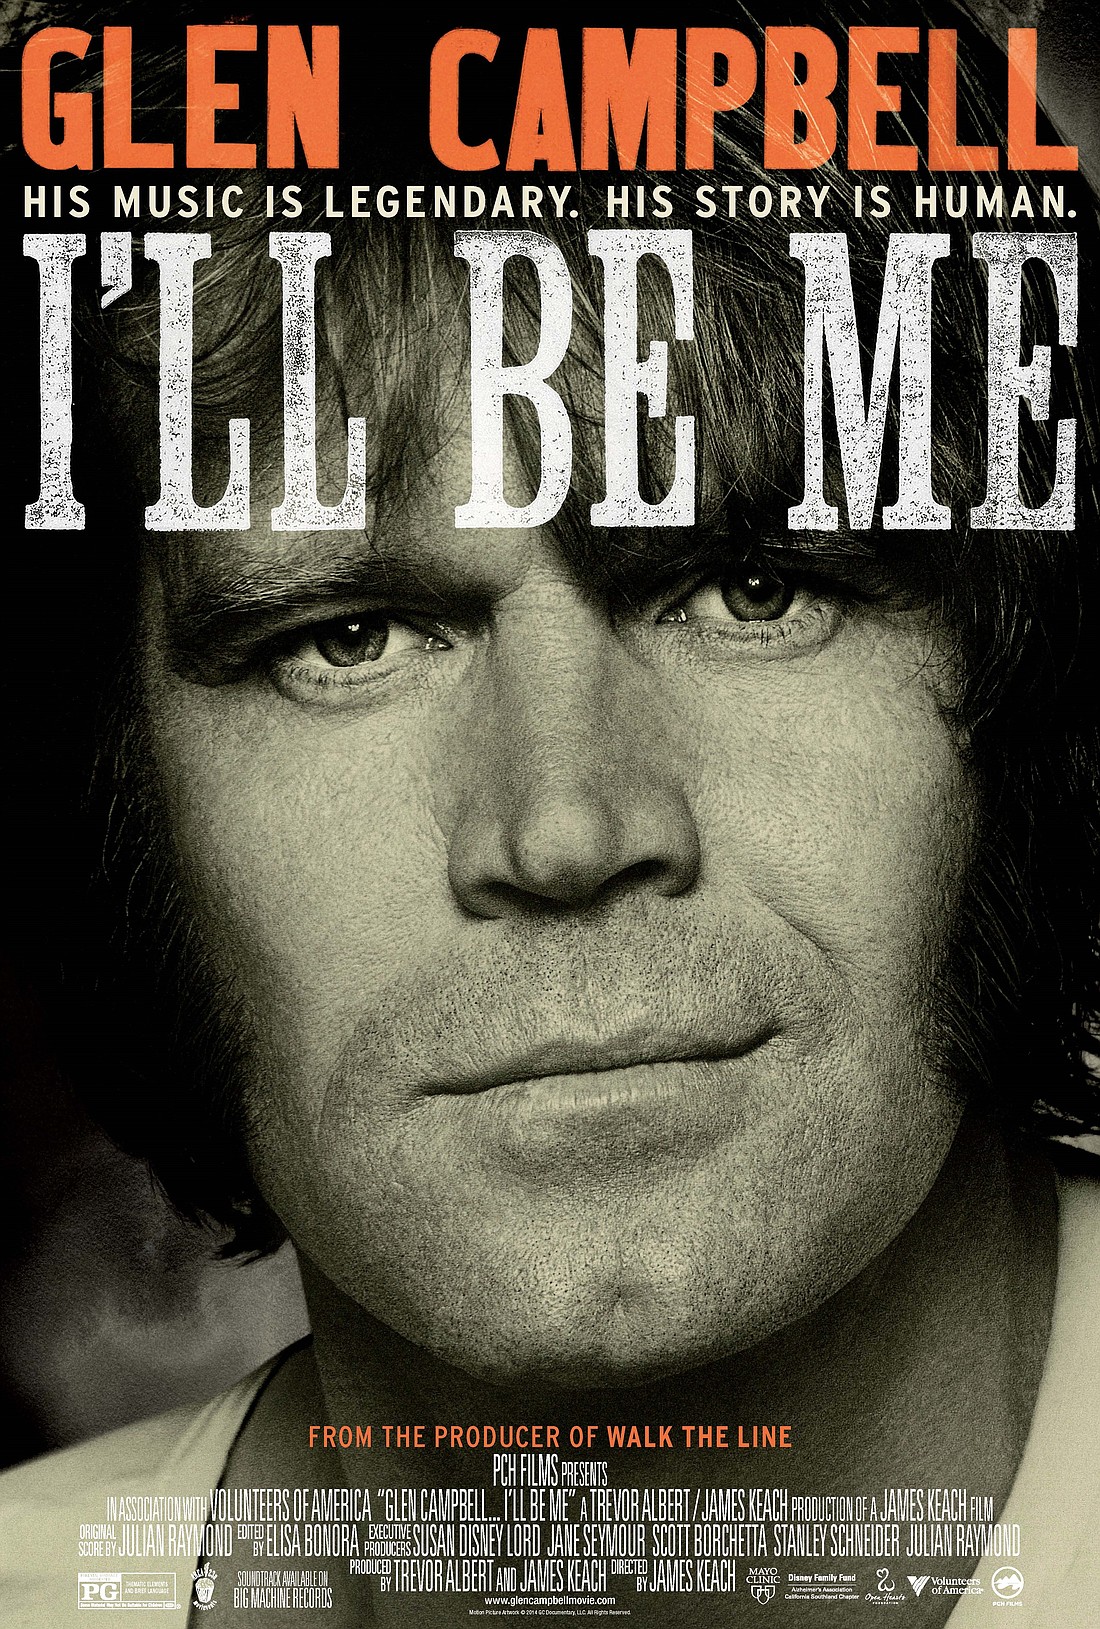 The Academy Award nominated film, “I’ll Be Me,” that documents music legend Glen Campbell’s final concert tour after being diagnosed with Alzheimer’s disease, is showing at the Edmonds Center for the Arts in Edmonds, Washington, on Saturday, April 18 at 7:30pm. A performance by Glen’s children follows the screening, along with a Q&A with the film’s director James Keach and Glen’s wife Kim.